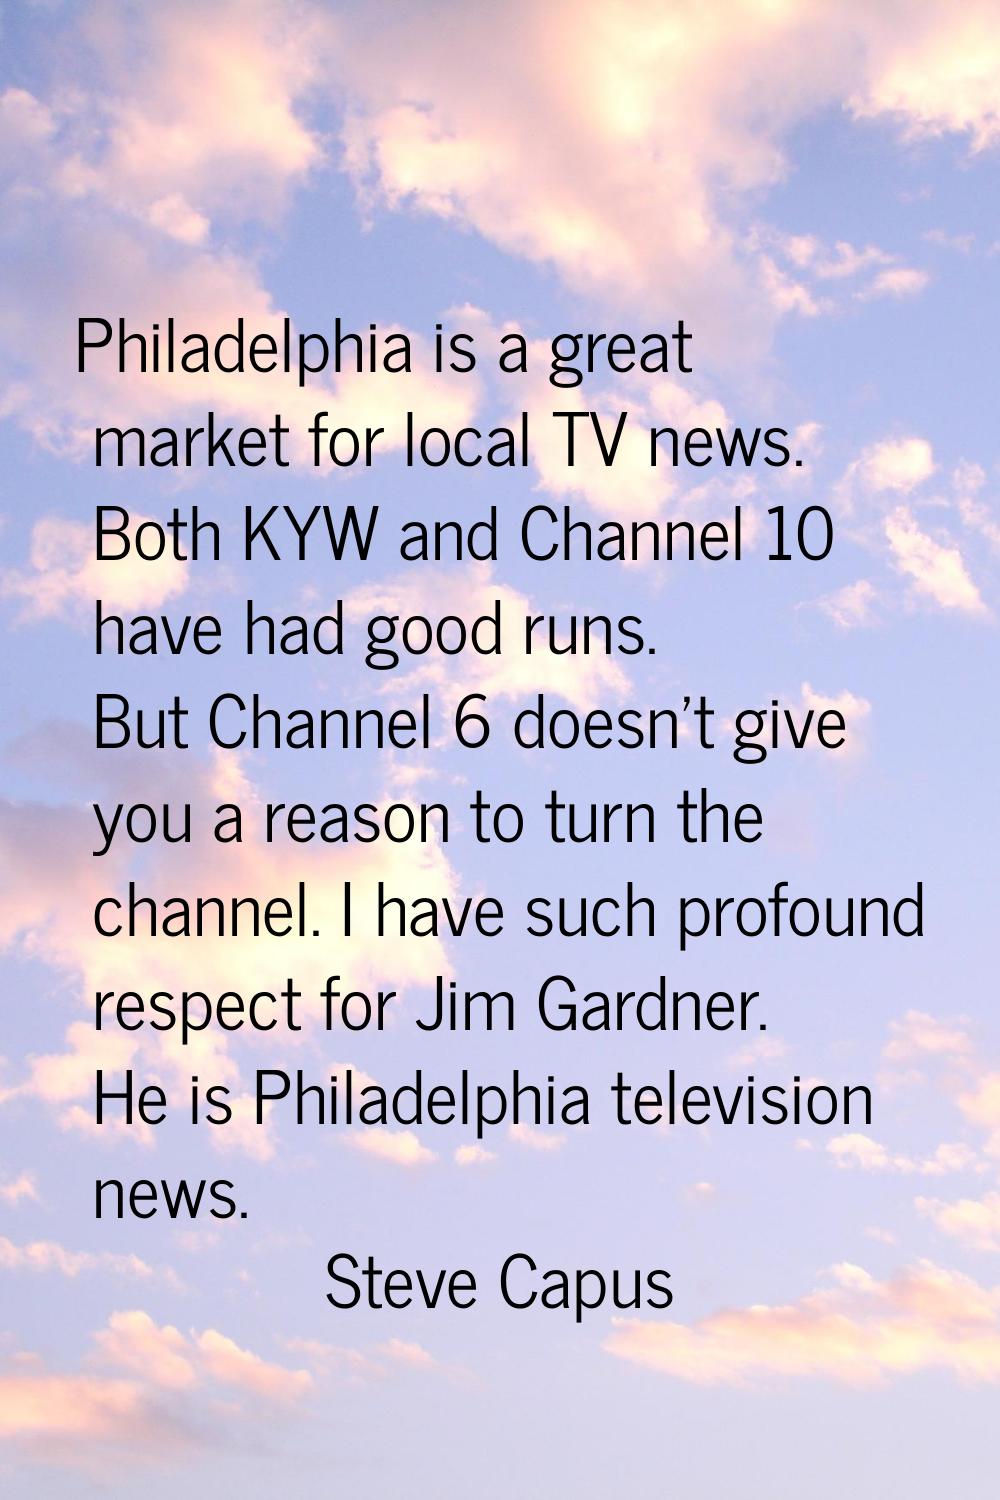 Philadelphia is a great market for local TV news. Both KYW and Channel 10 have had good runs. But C